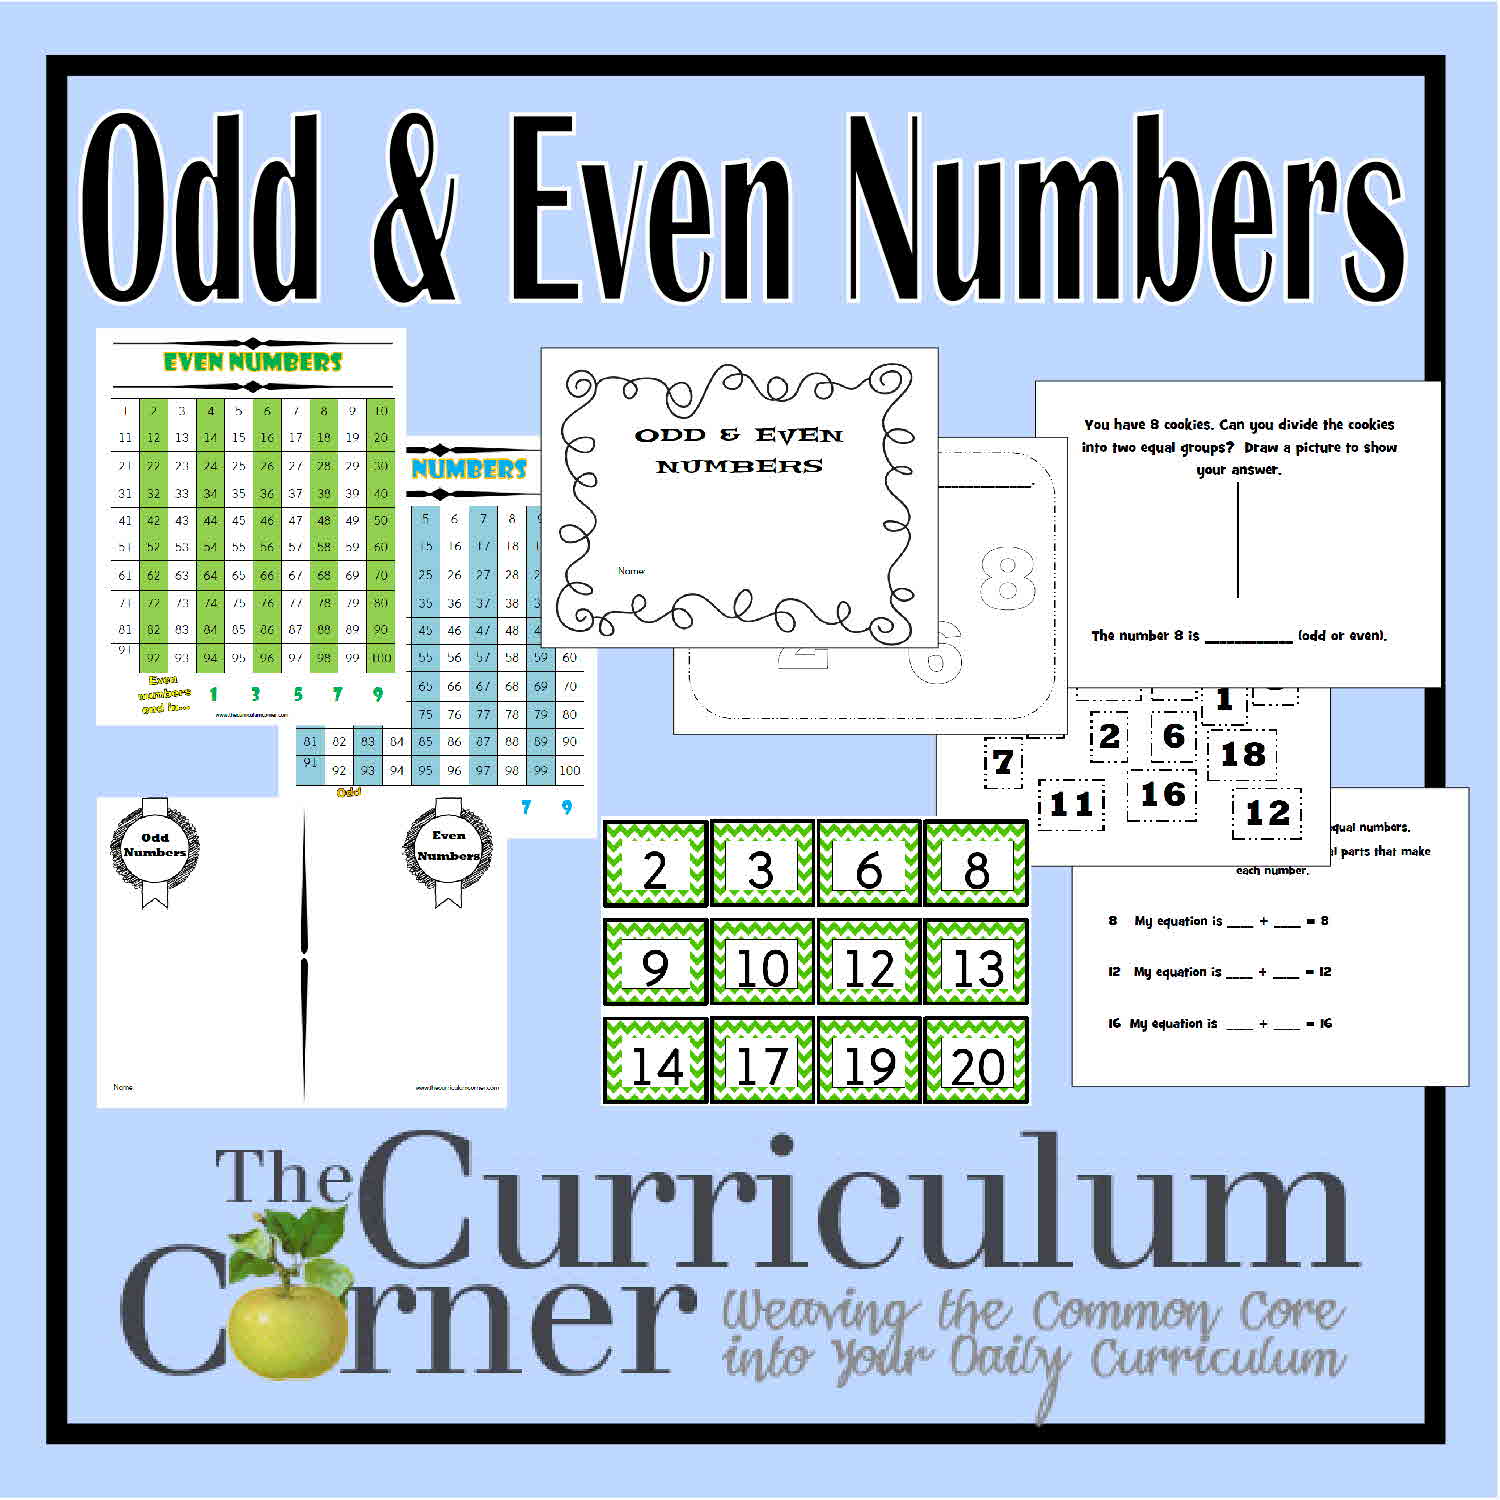 odd-and-even-numbers-the-curriculum-corner-123